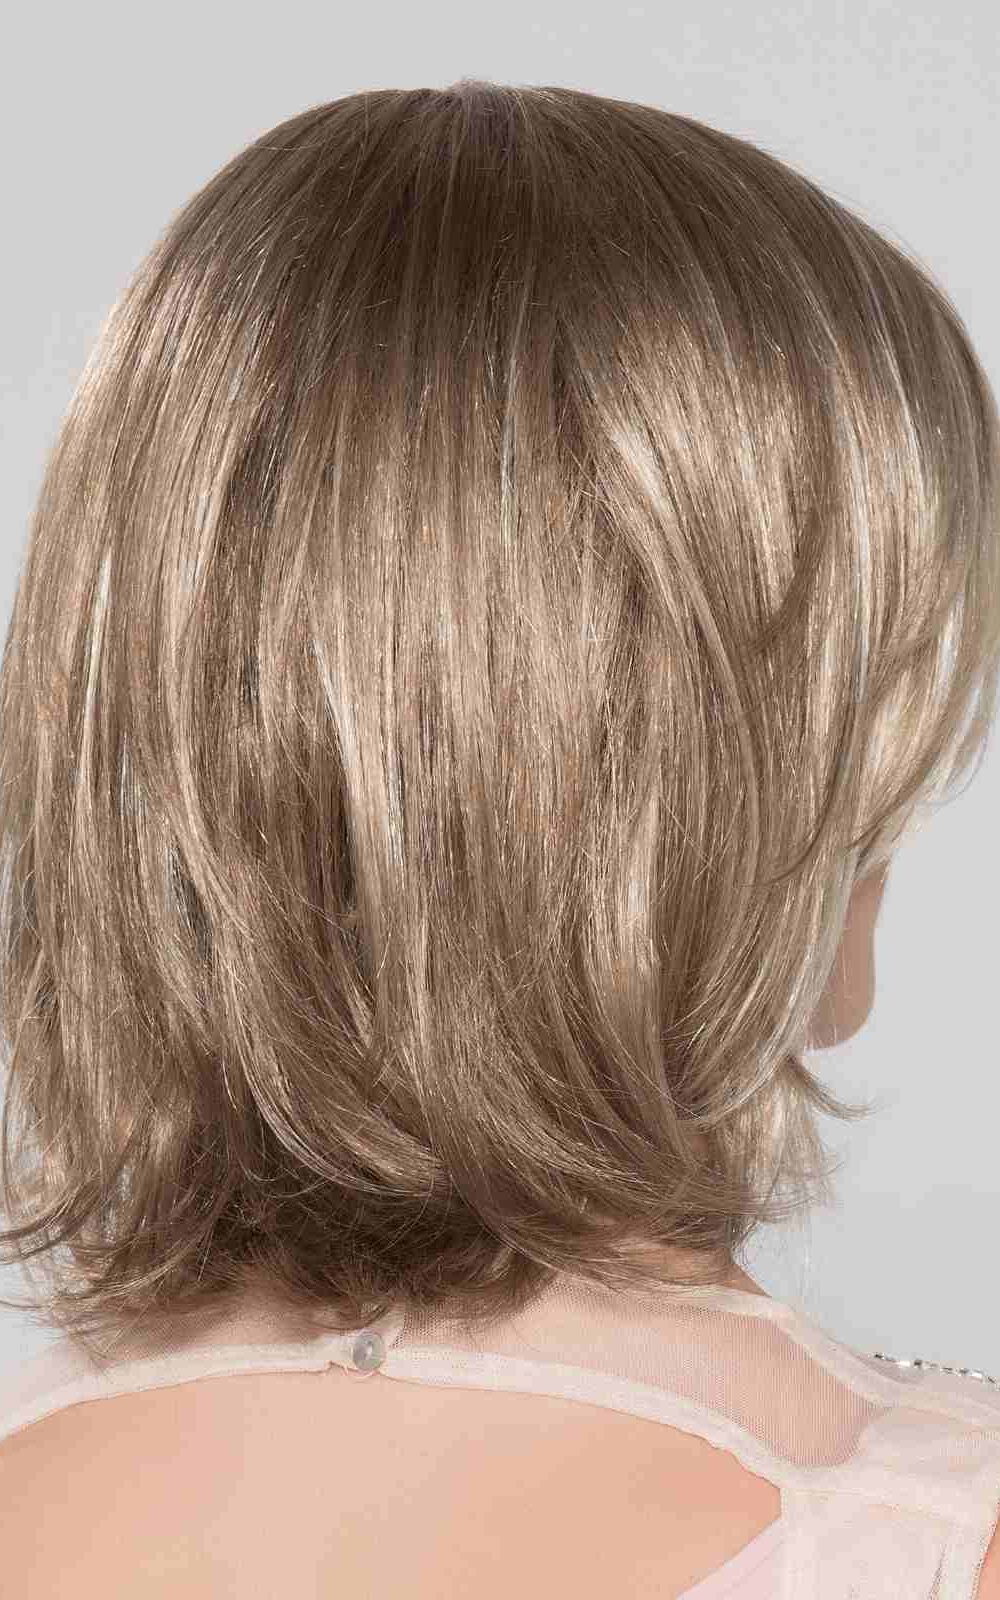 Lucky Hi by Ellen Wille, is super lightweight and ready to wear mid-length wig